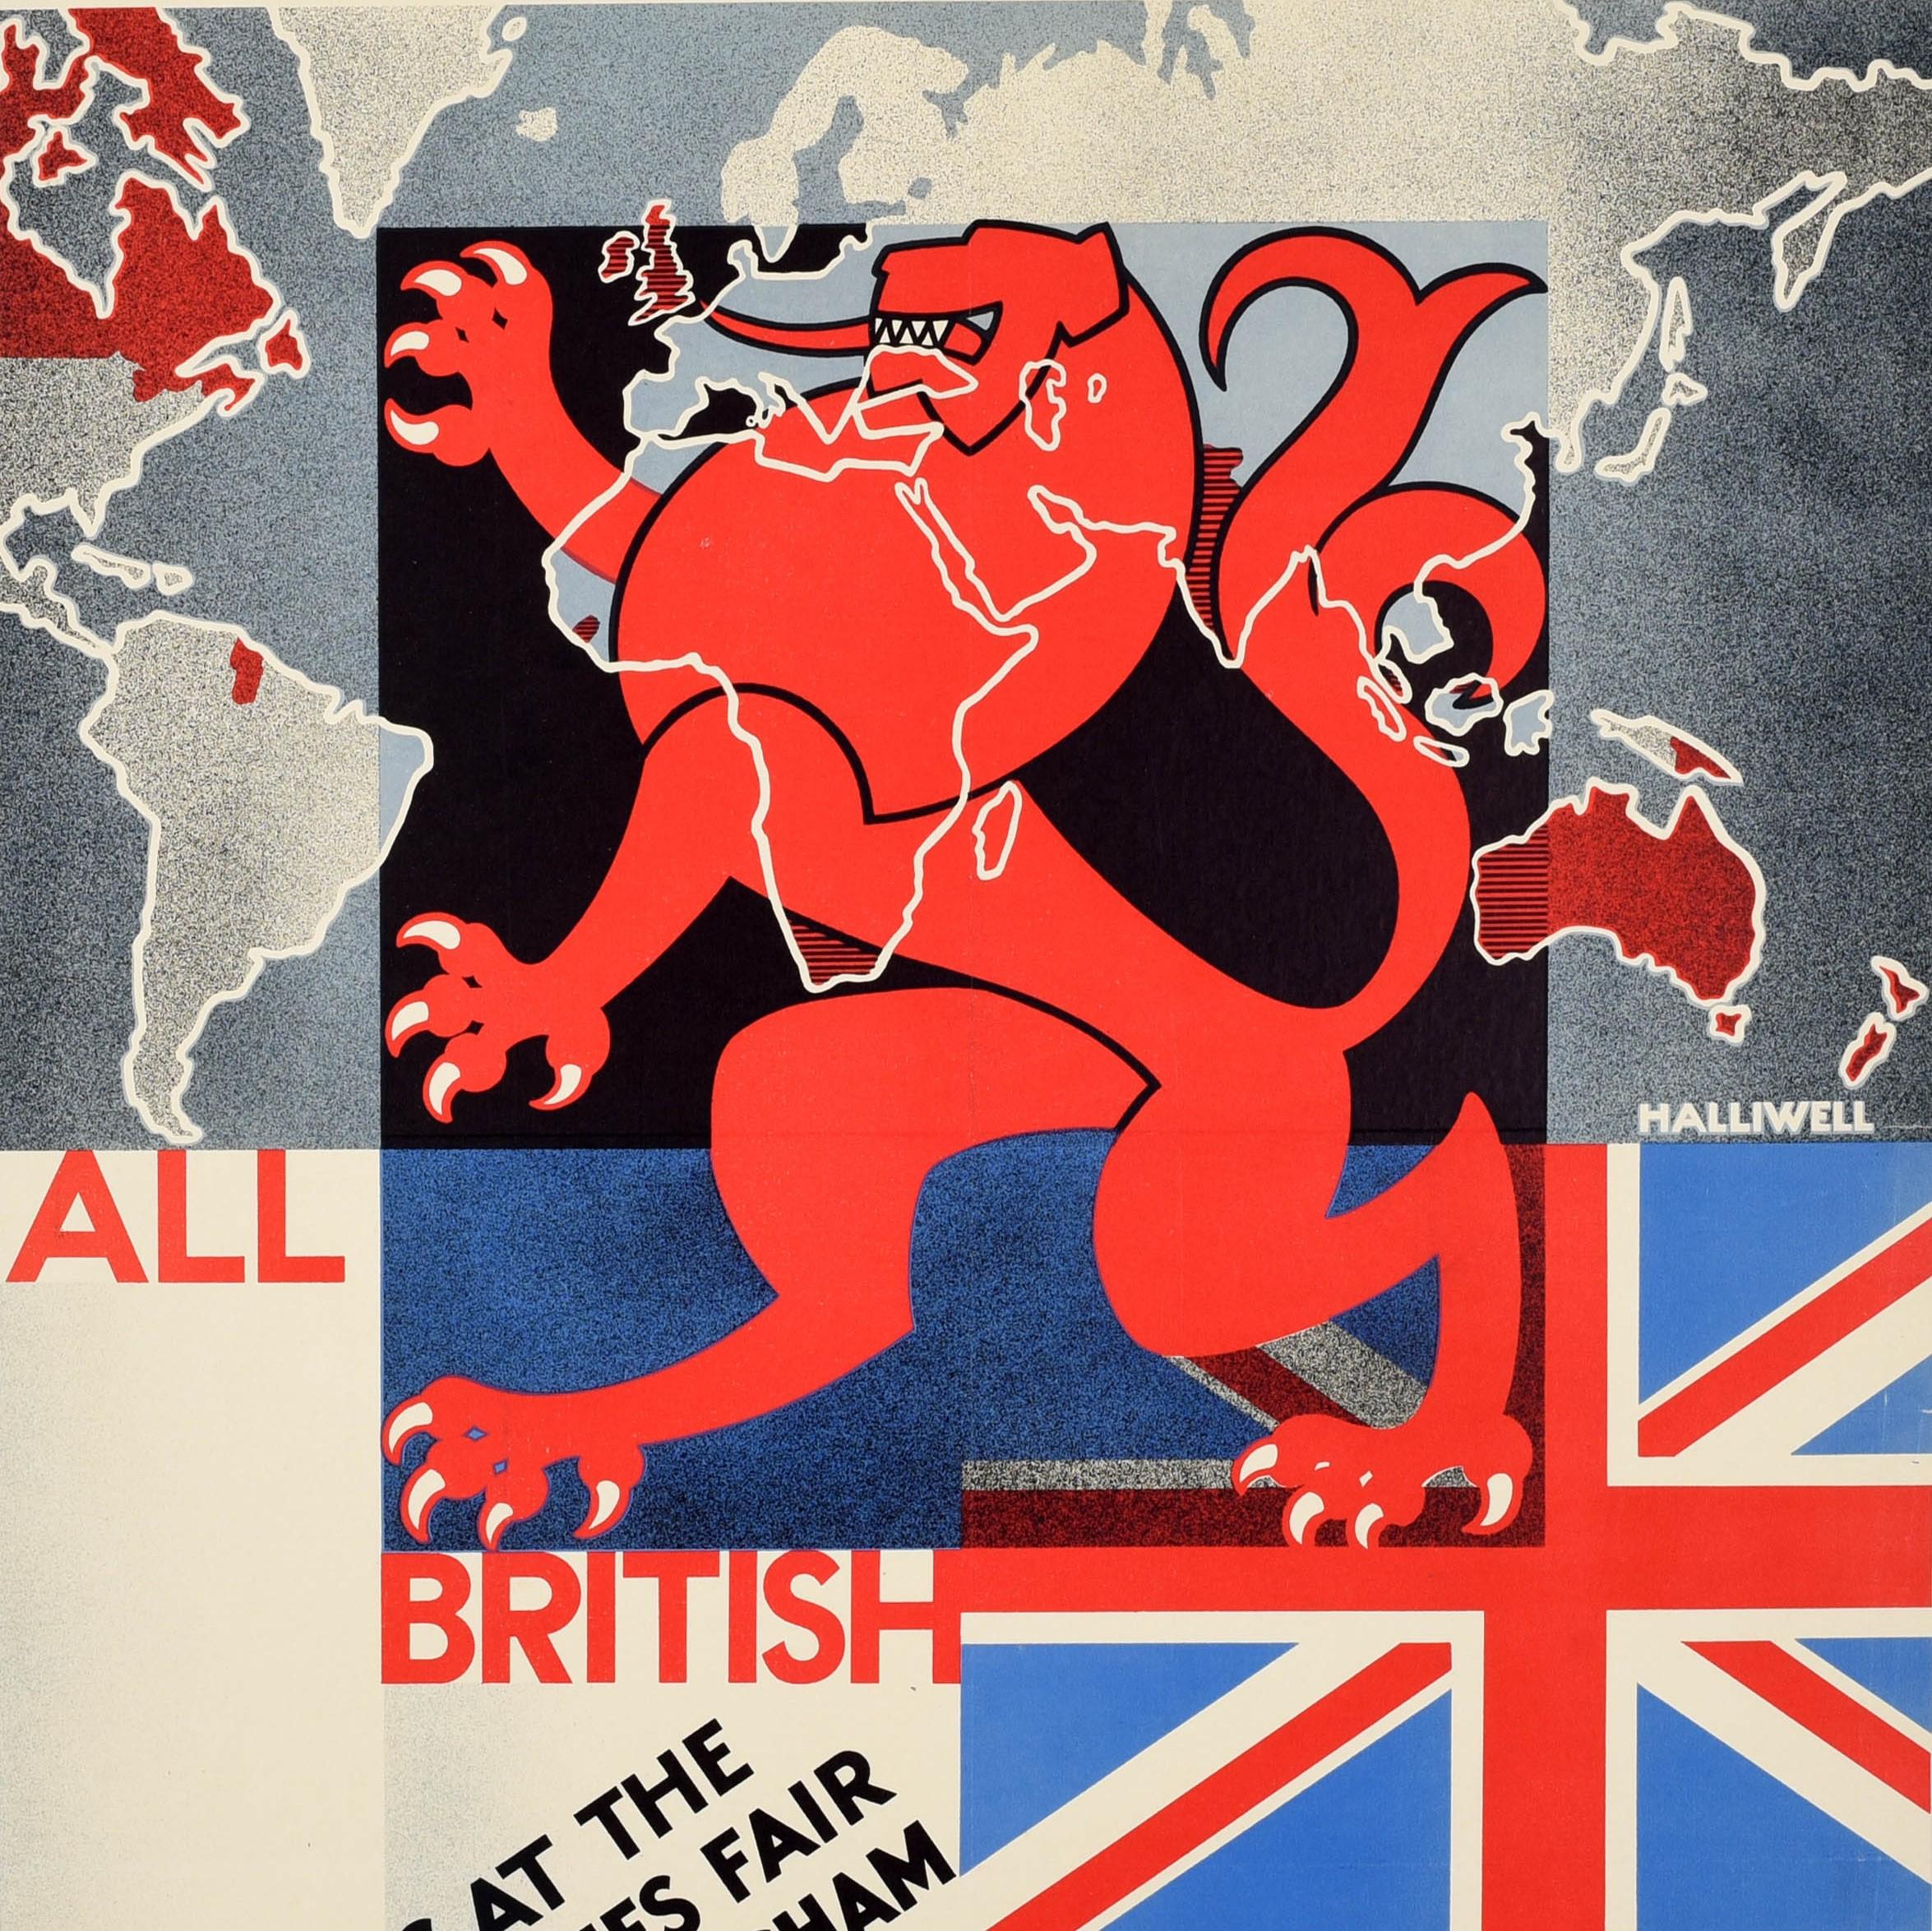 Original vintage exhibition advertising poster - Imperial and International Communications Limited exhibiting at the British Industries Fair London and Birmingham All British Routes via Imperial via Eastern via Empiradio or via Marconi Head Office